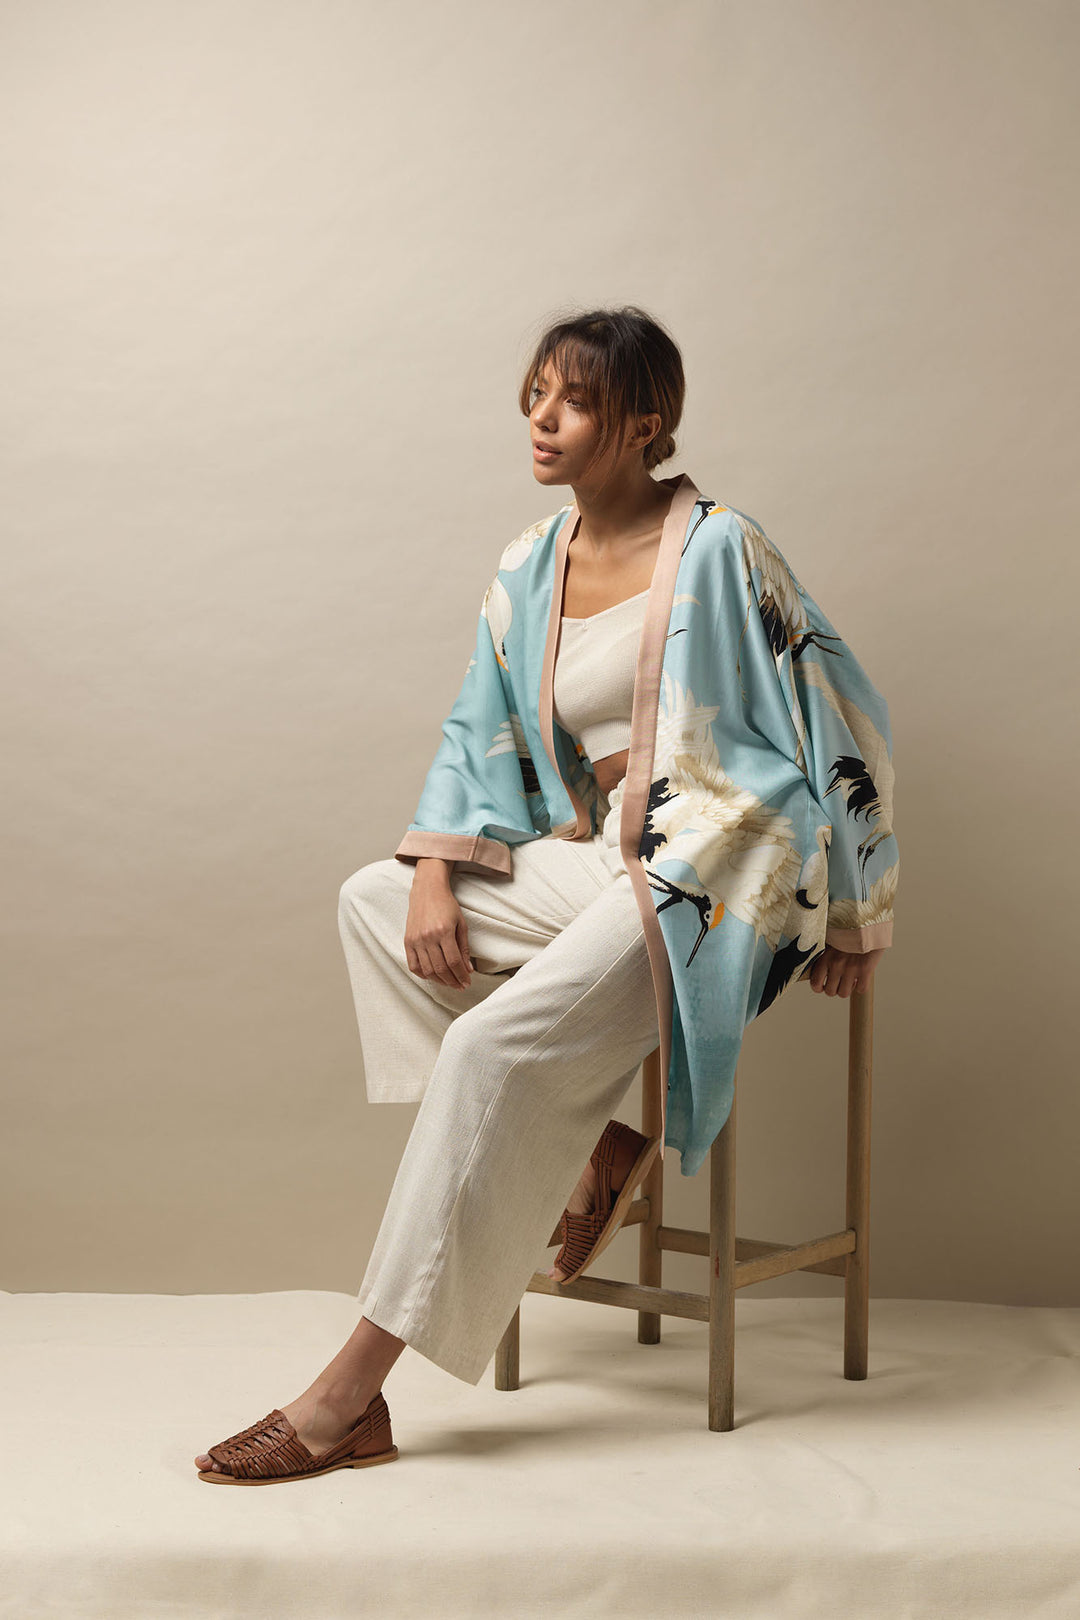 The One Hundred Stars Stork Crane Sky Blue Collar Kimono is a loose fitting mid length kimono, which can be worn as a cover up in the day or an evening jacket.  